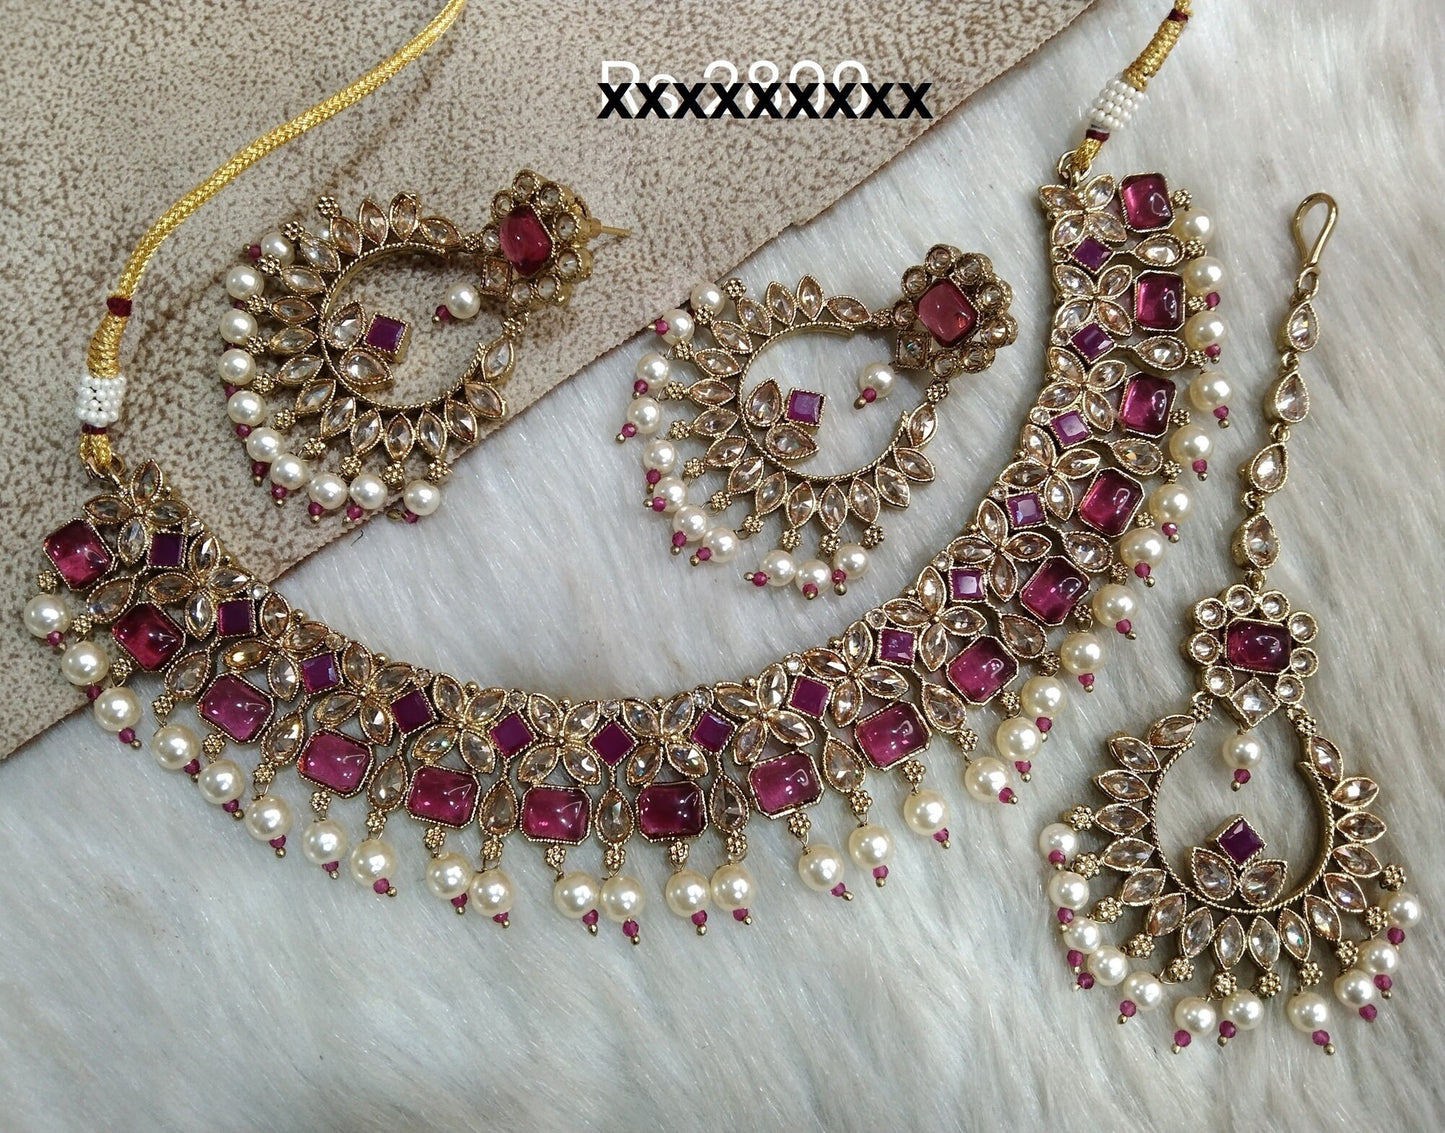 Indian Jewellery/Dark gold mint pink, Ruby necklace Set/Bollywood Gold Indian Jewelry Jewellery Set cairns /Bridesmaid jewellery sets